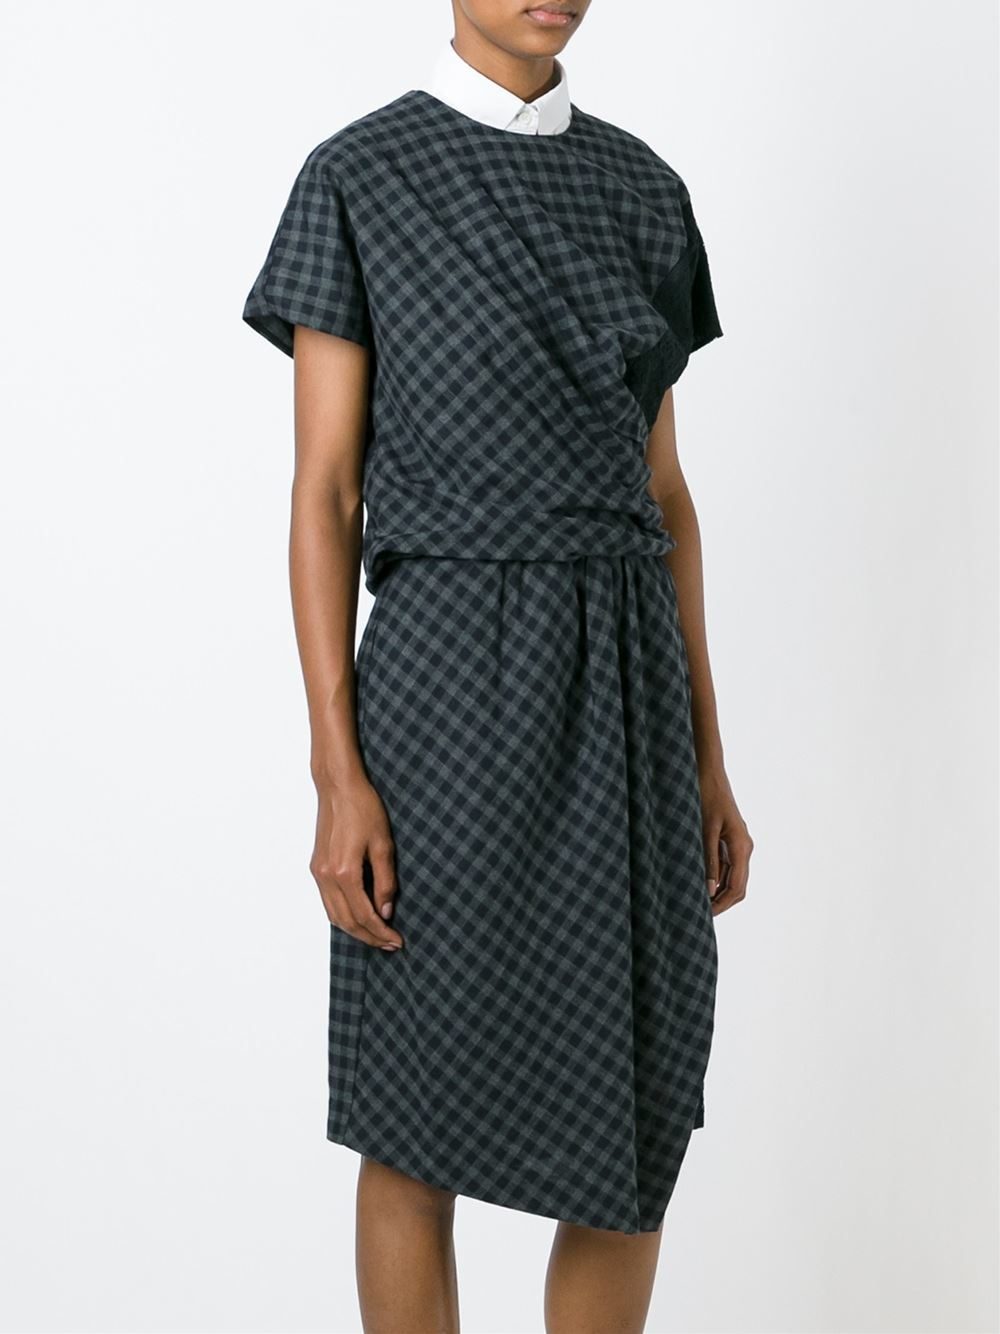 Carven Draped Gingham Check Dress in Green | Lyst